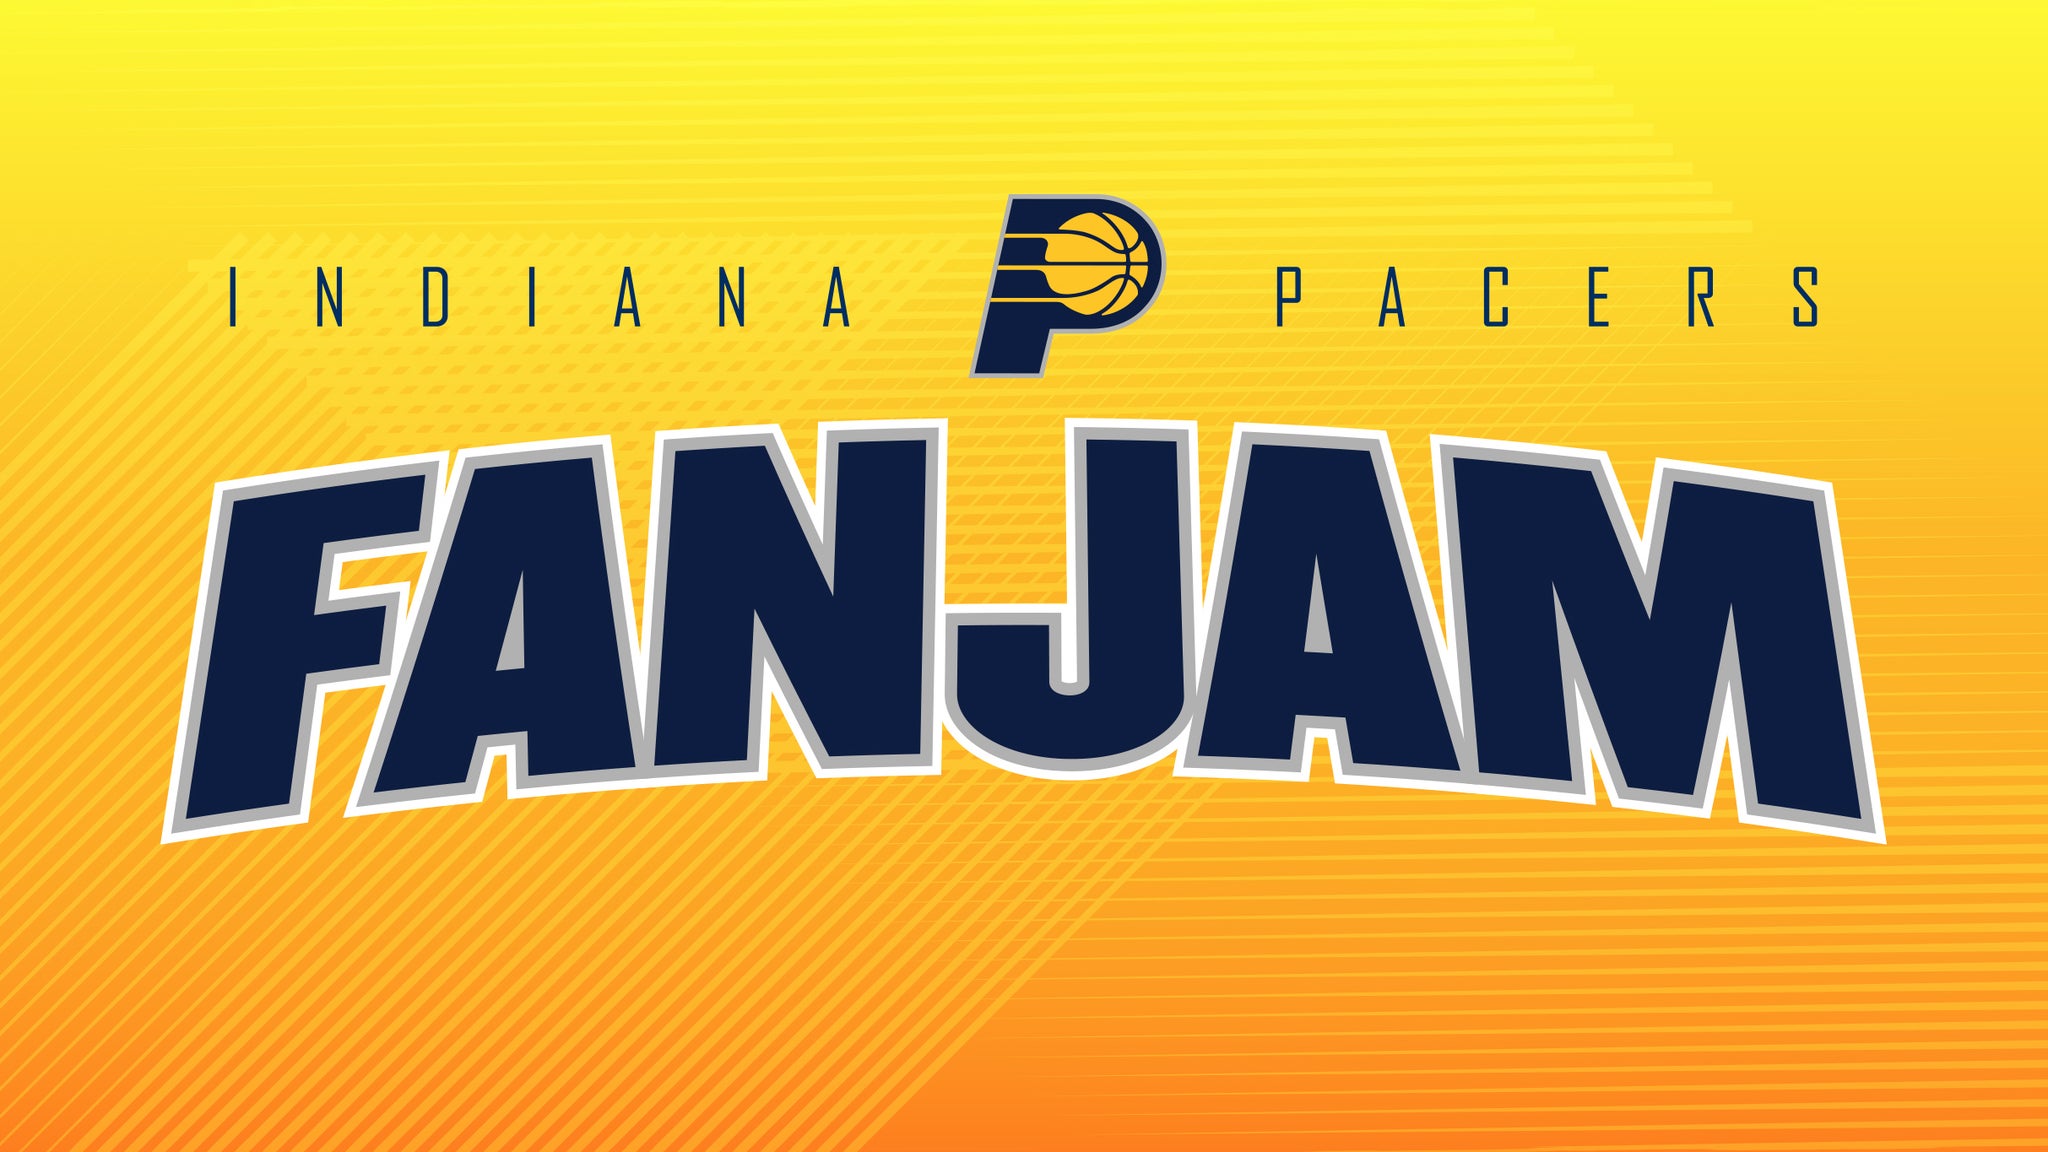 Indiana Pacers FanJam Tickets Single Game Tickets & Schedule